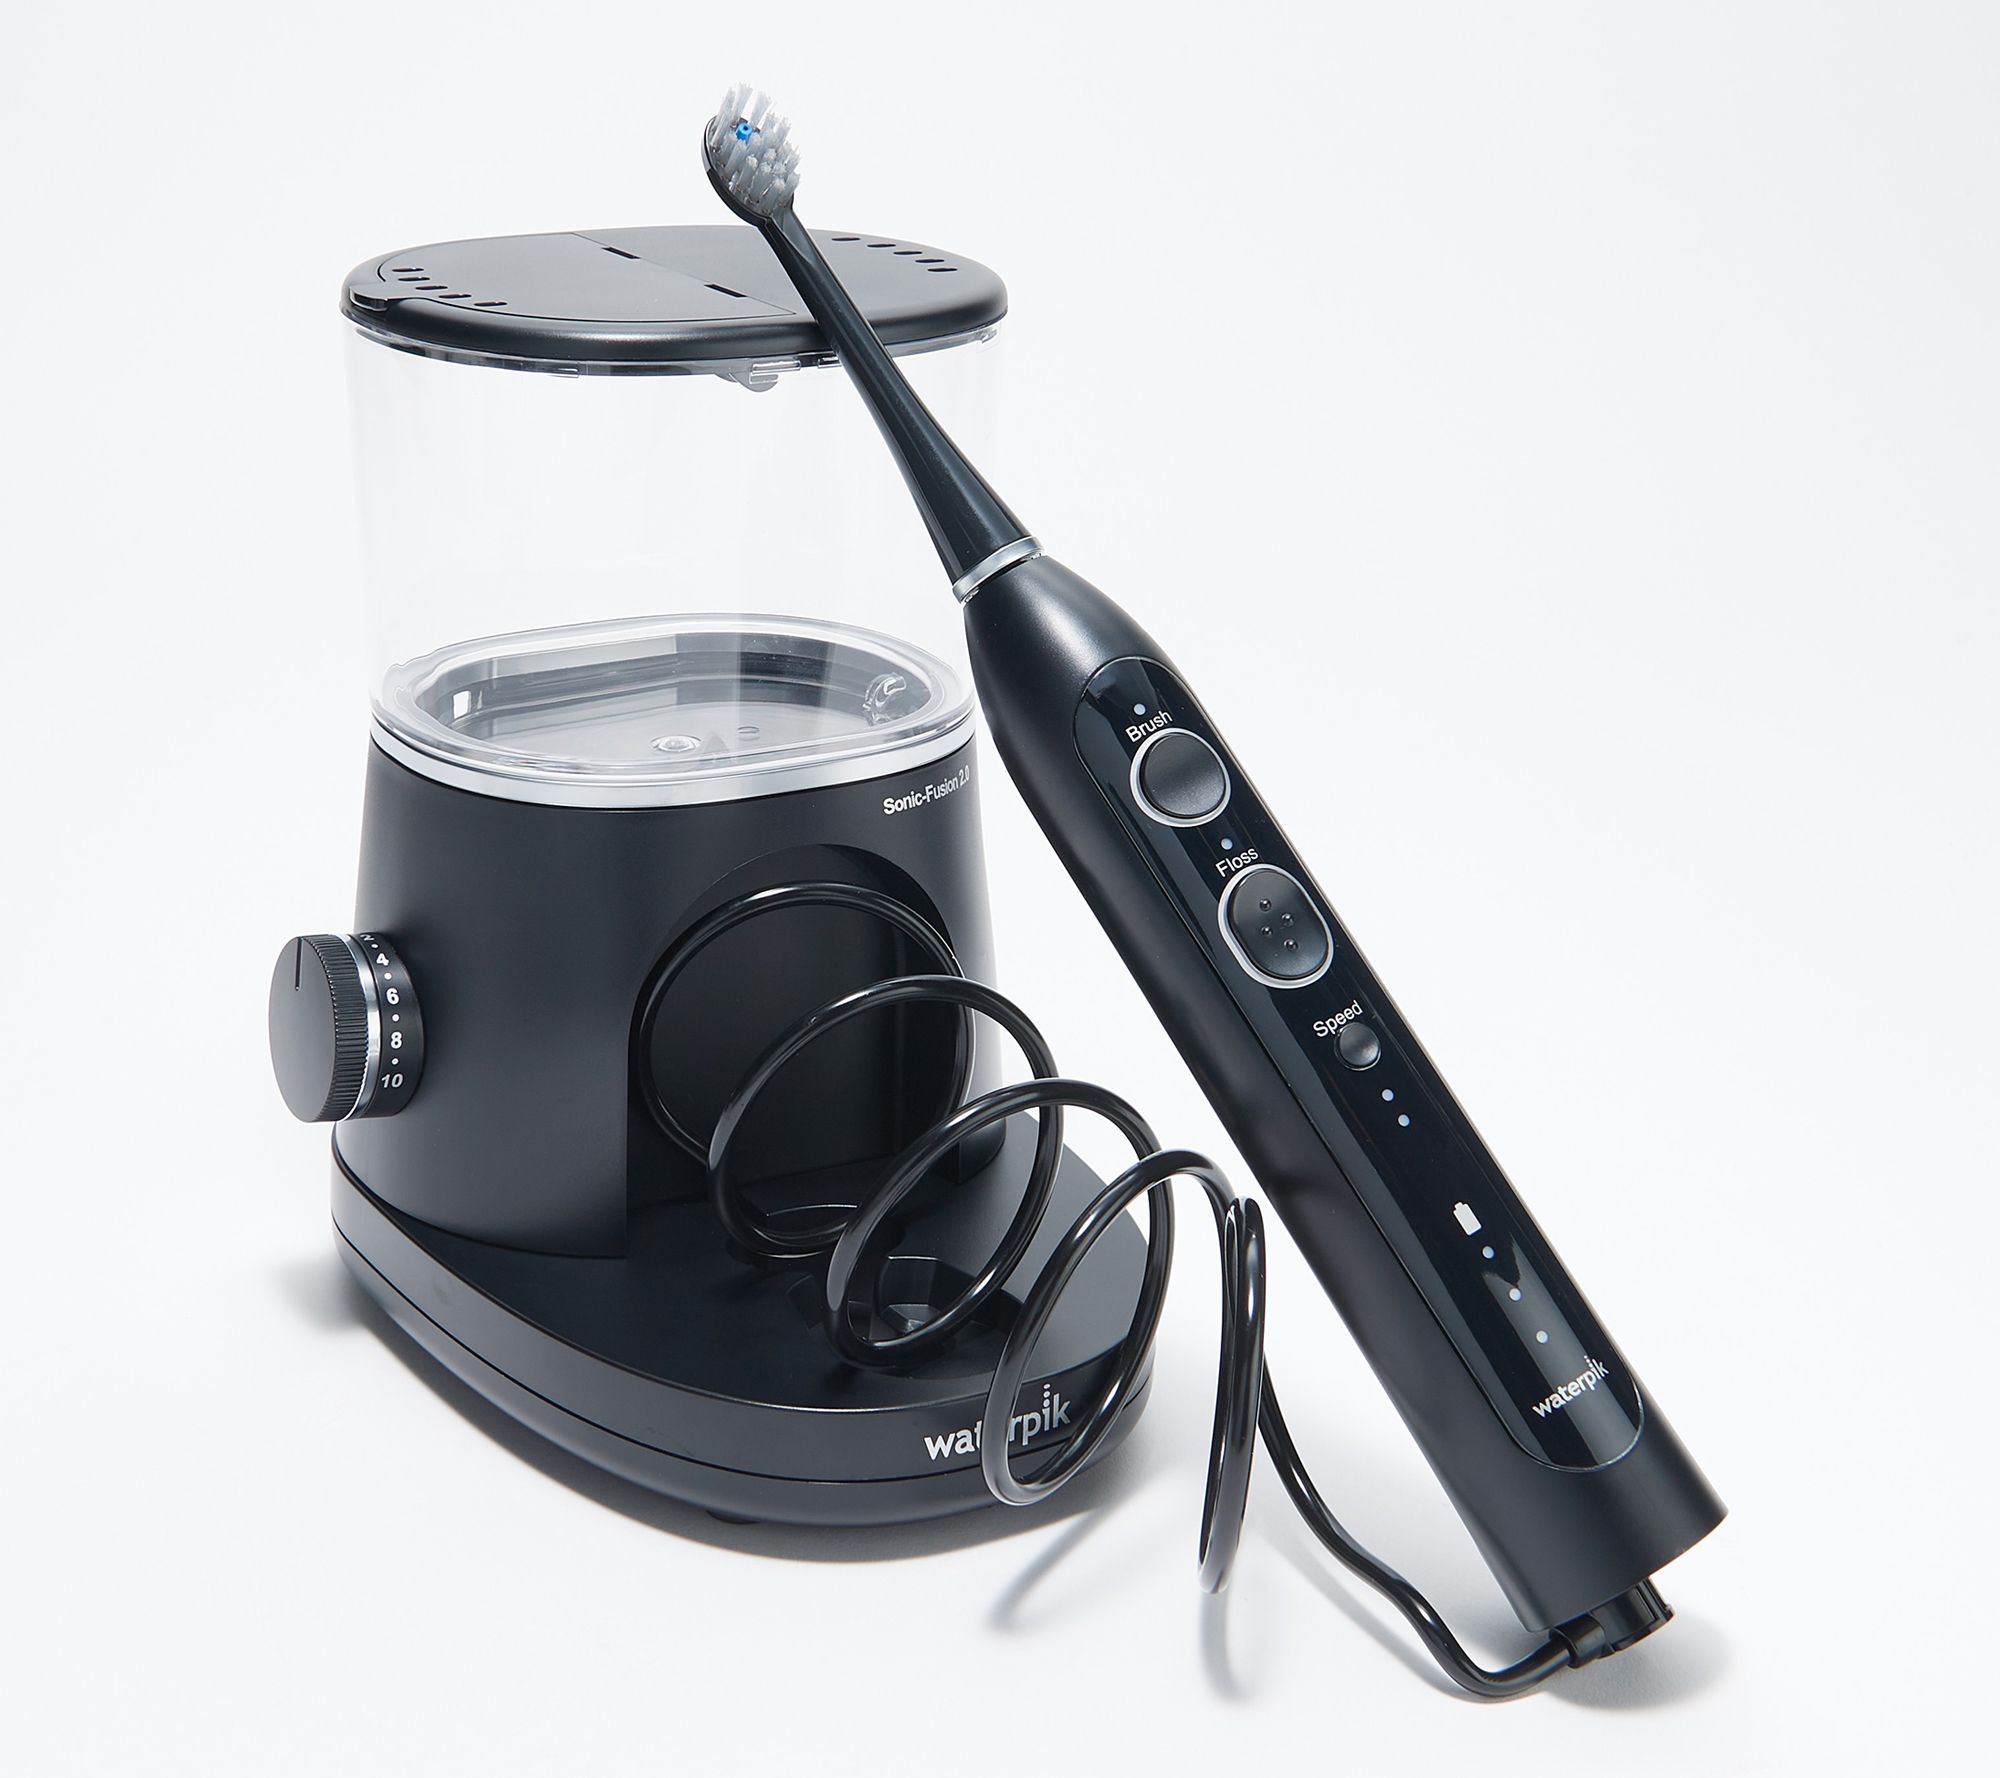 waterpik-water-pik-sonic-fusion-rechargeable-toothbrush-and-oral